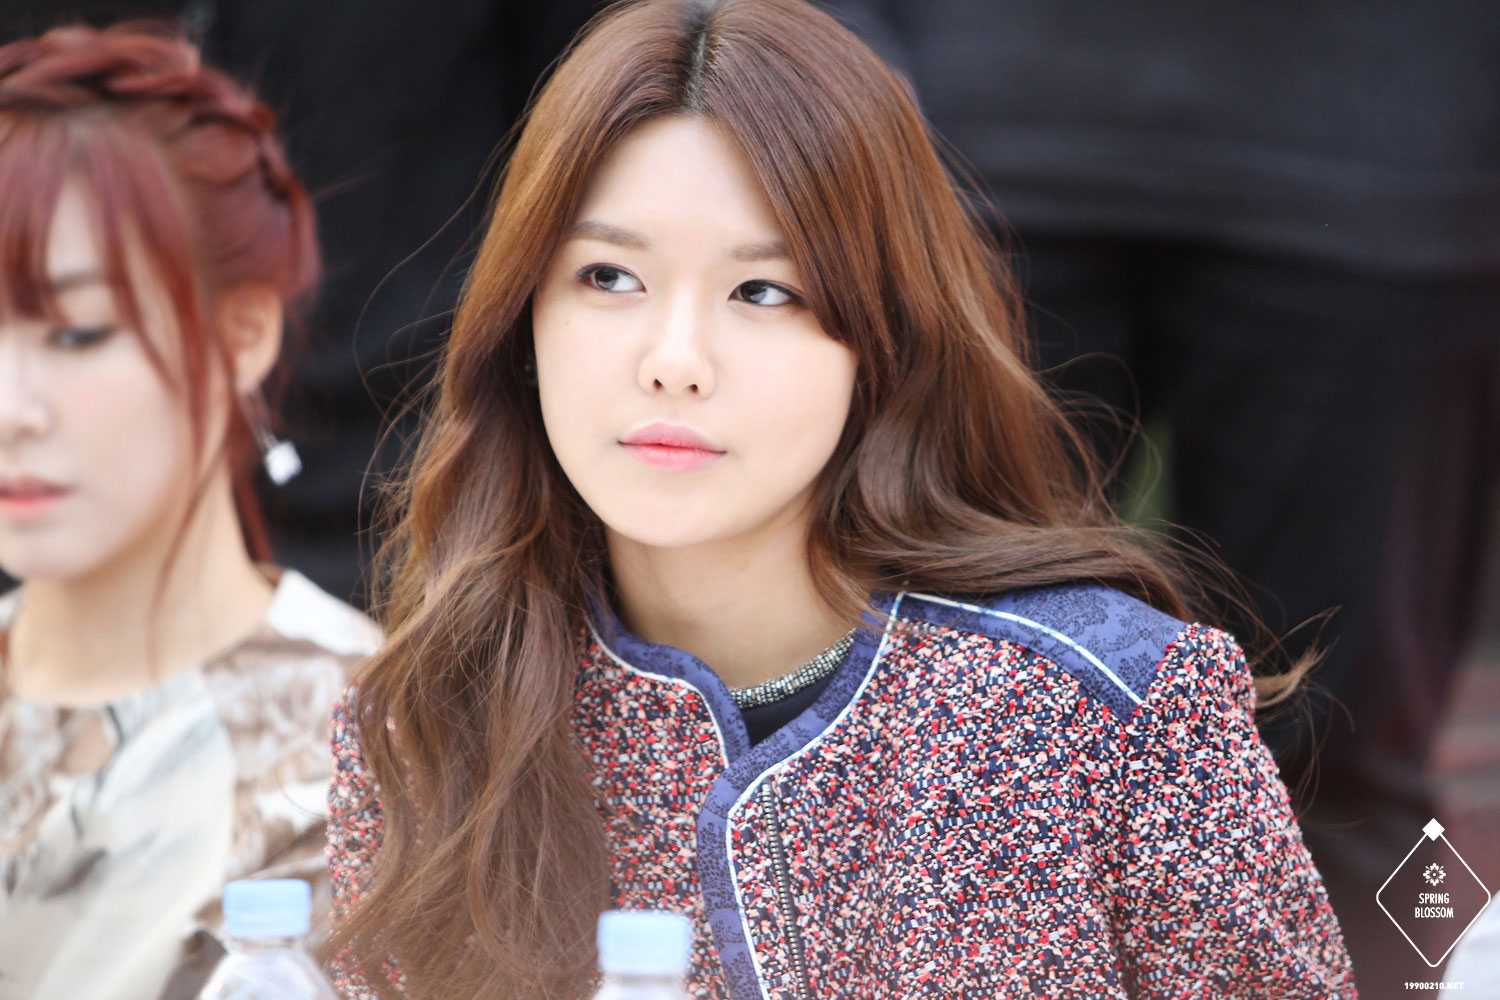 Sooyoung @ Lotte Department Store fansign